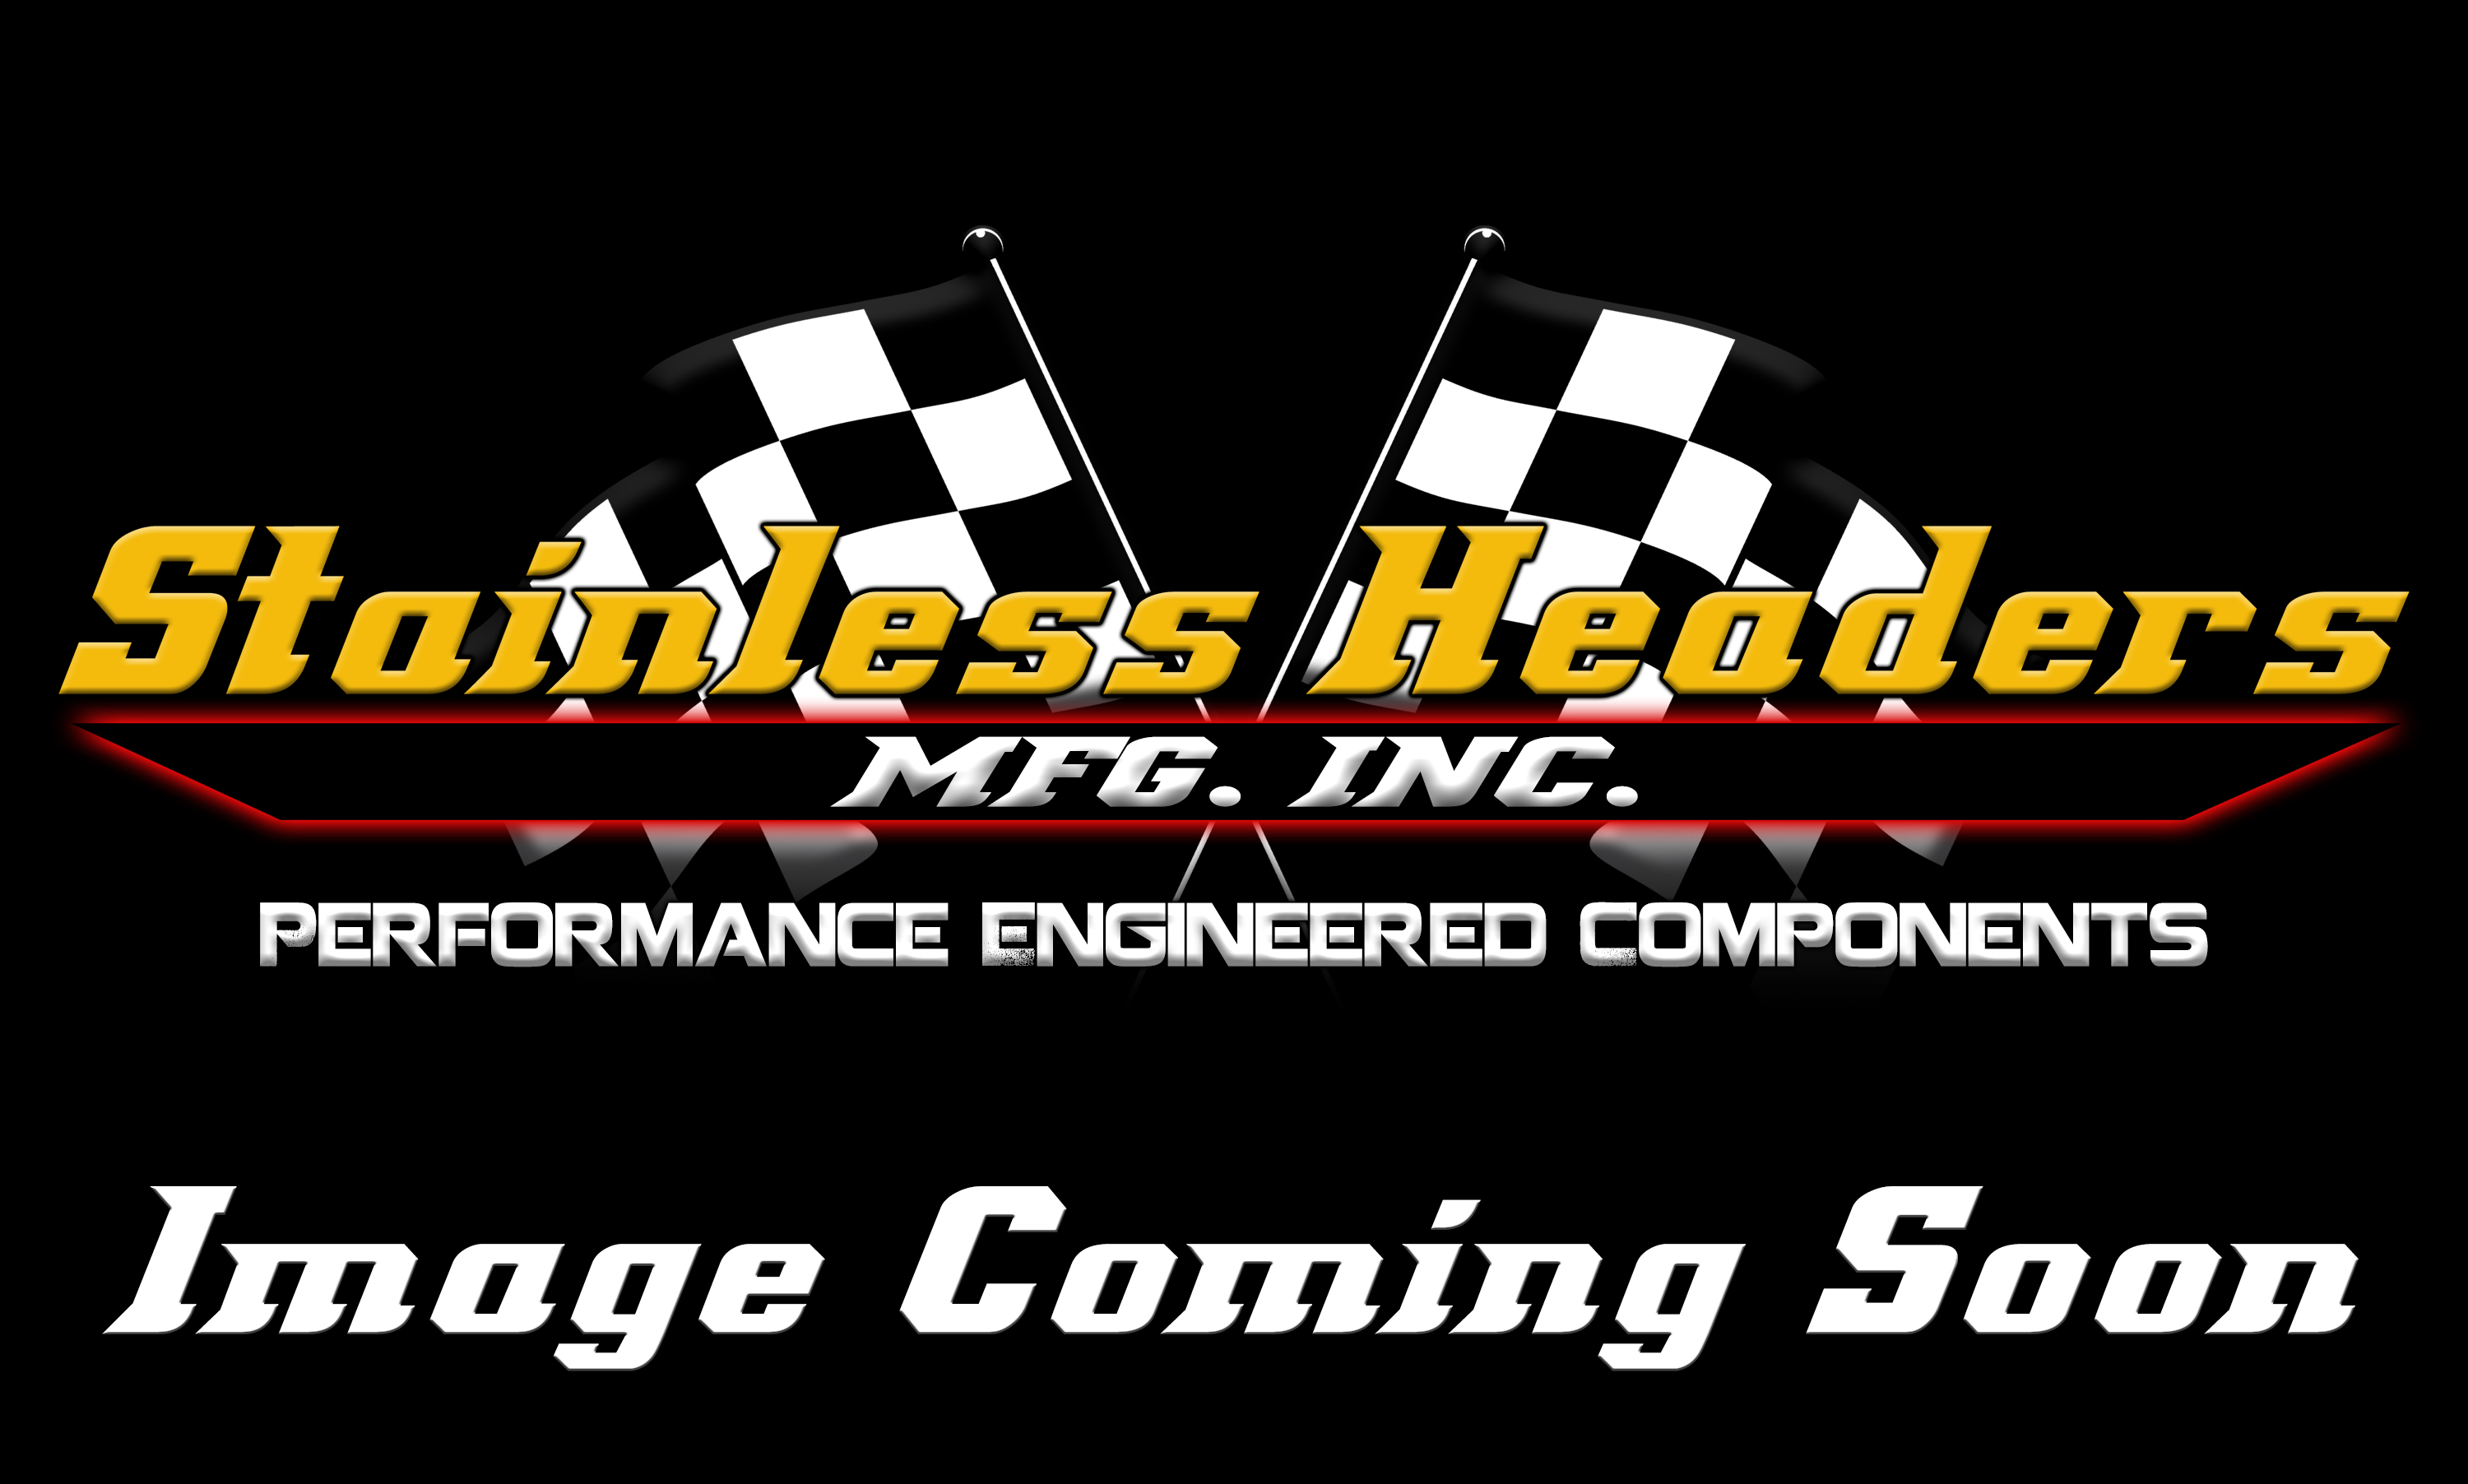 Stainless Headers - 2 1/4" Primary 5 into 1 Performance Merge Collector-16ga 321ss